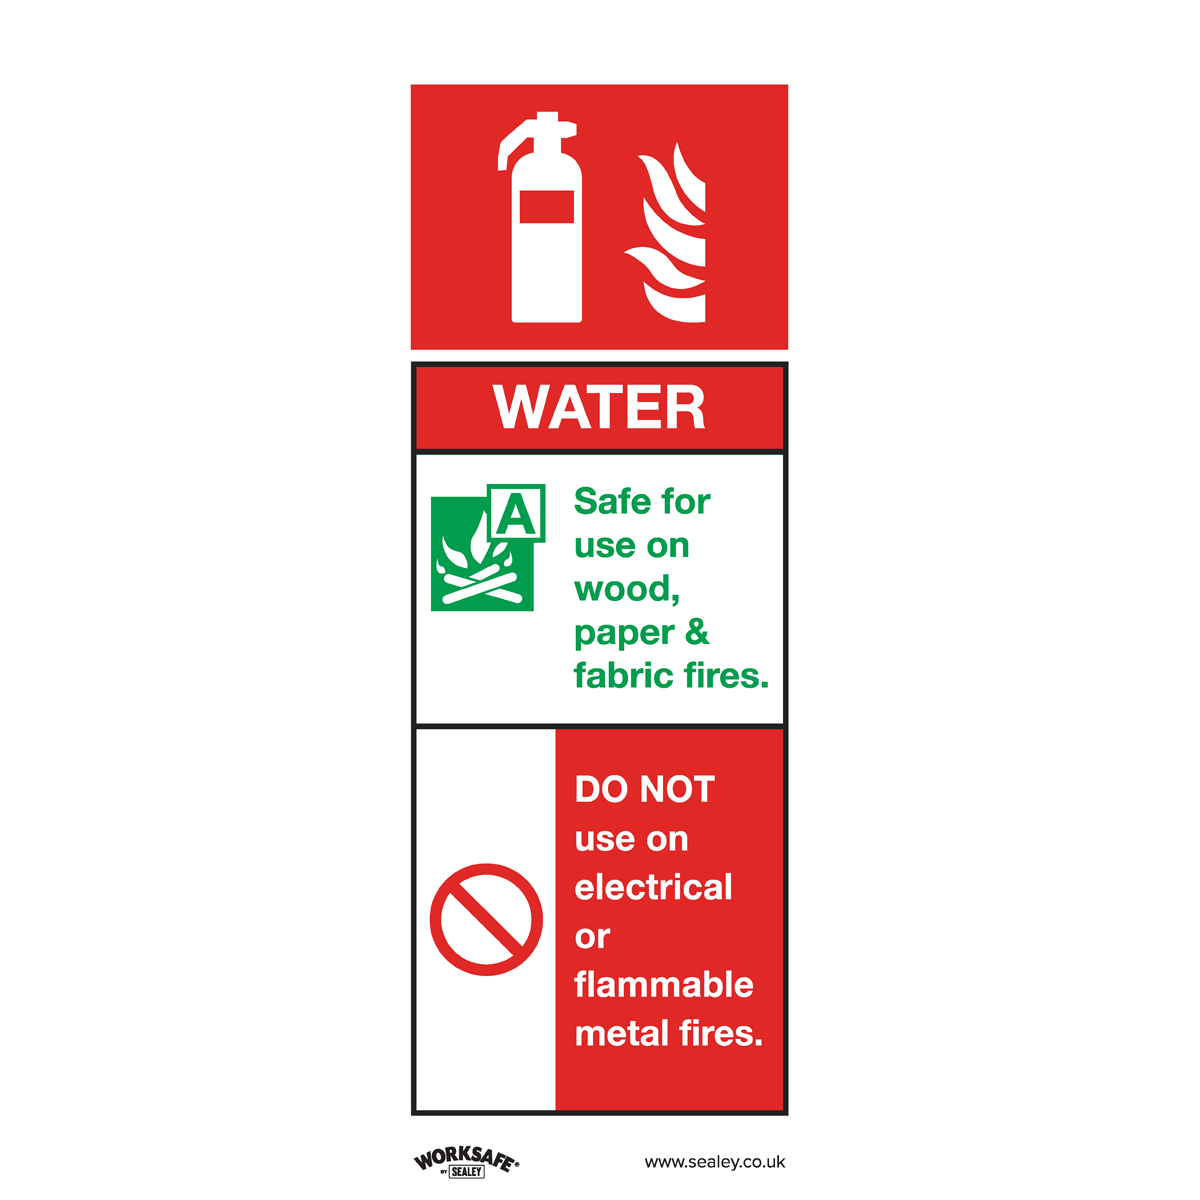 Safe Conditions Safety Sign - Water Fire Extinguisher - Self-Adhesive Vinyl - Pack of 10 - SS27V10 - Farming Parts